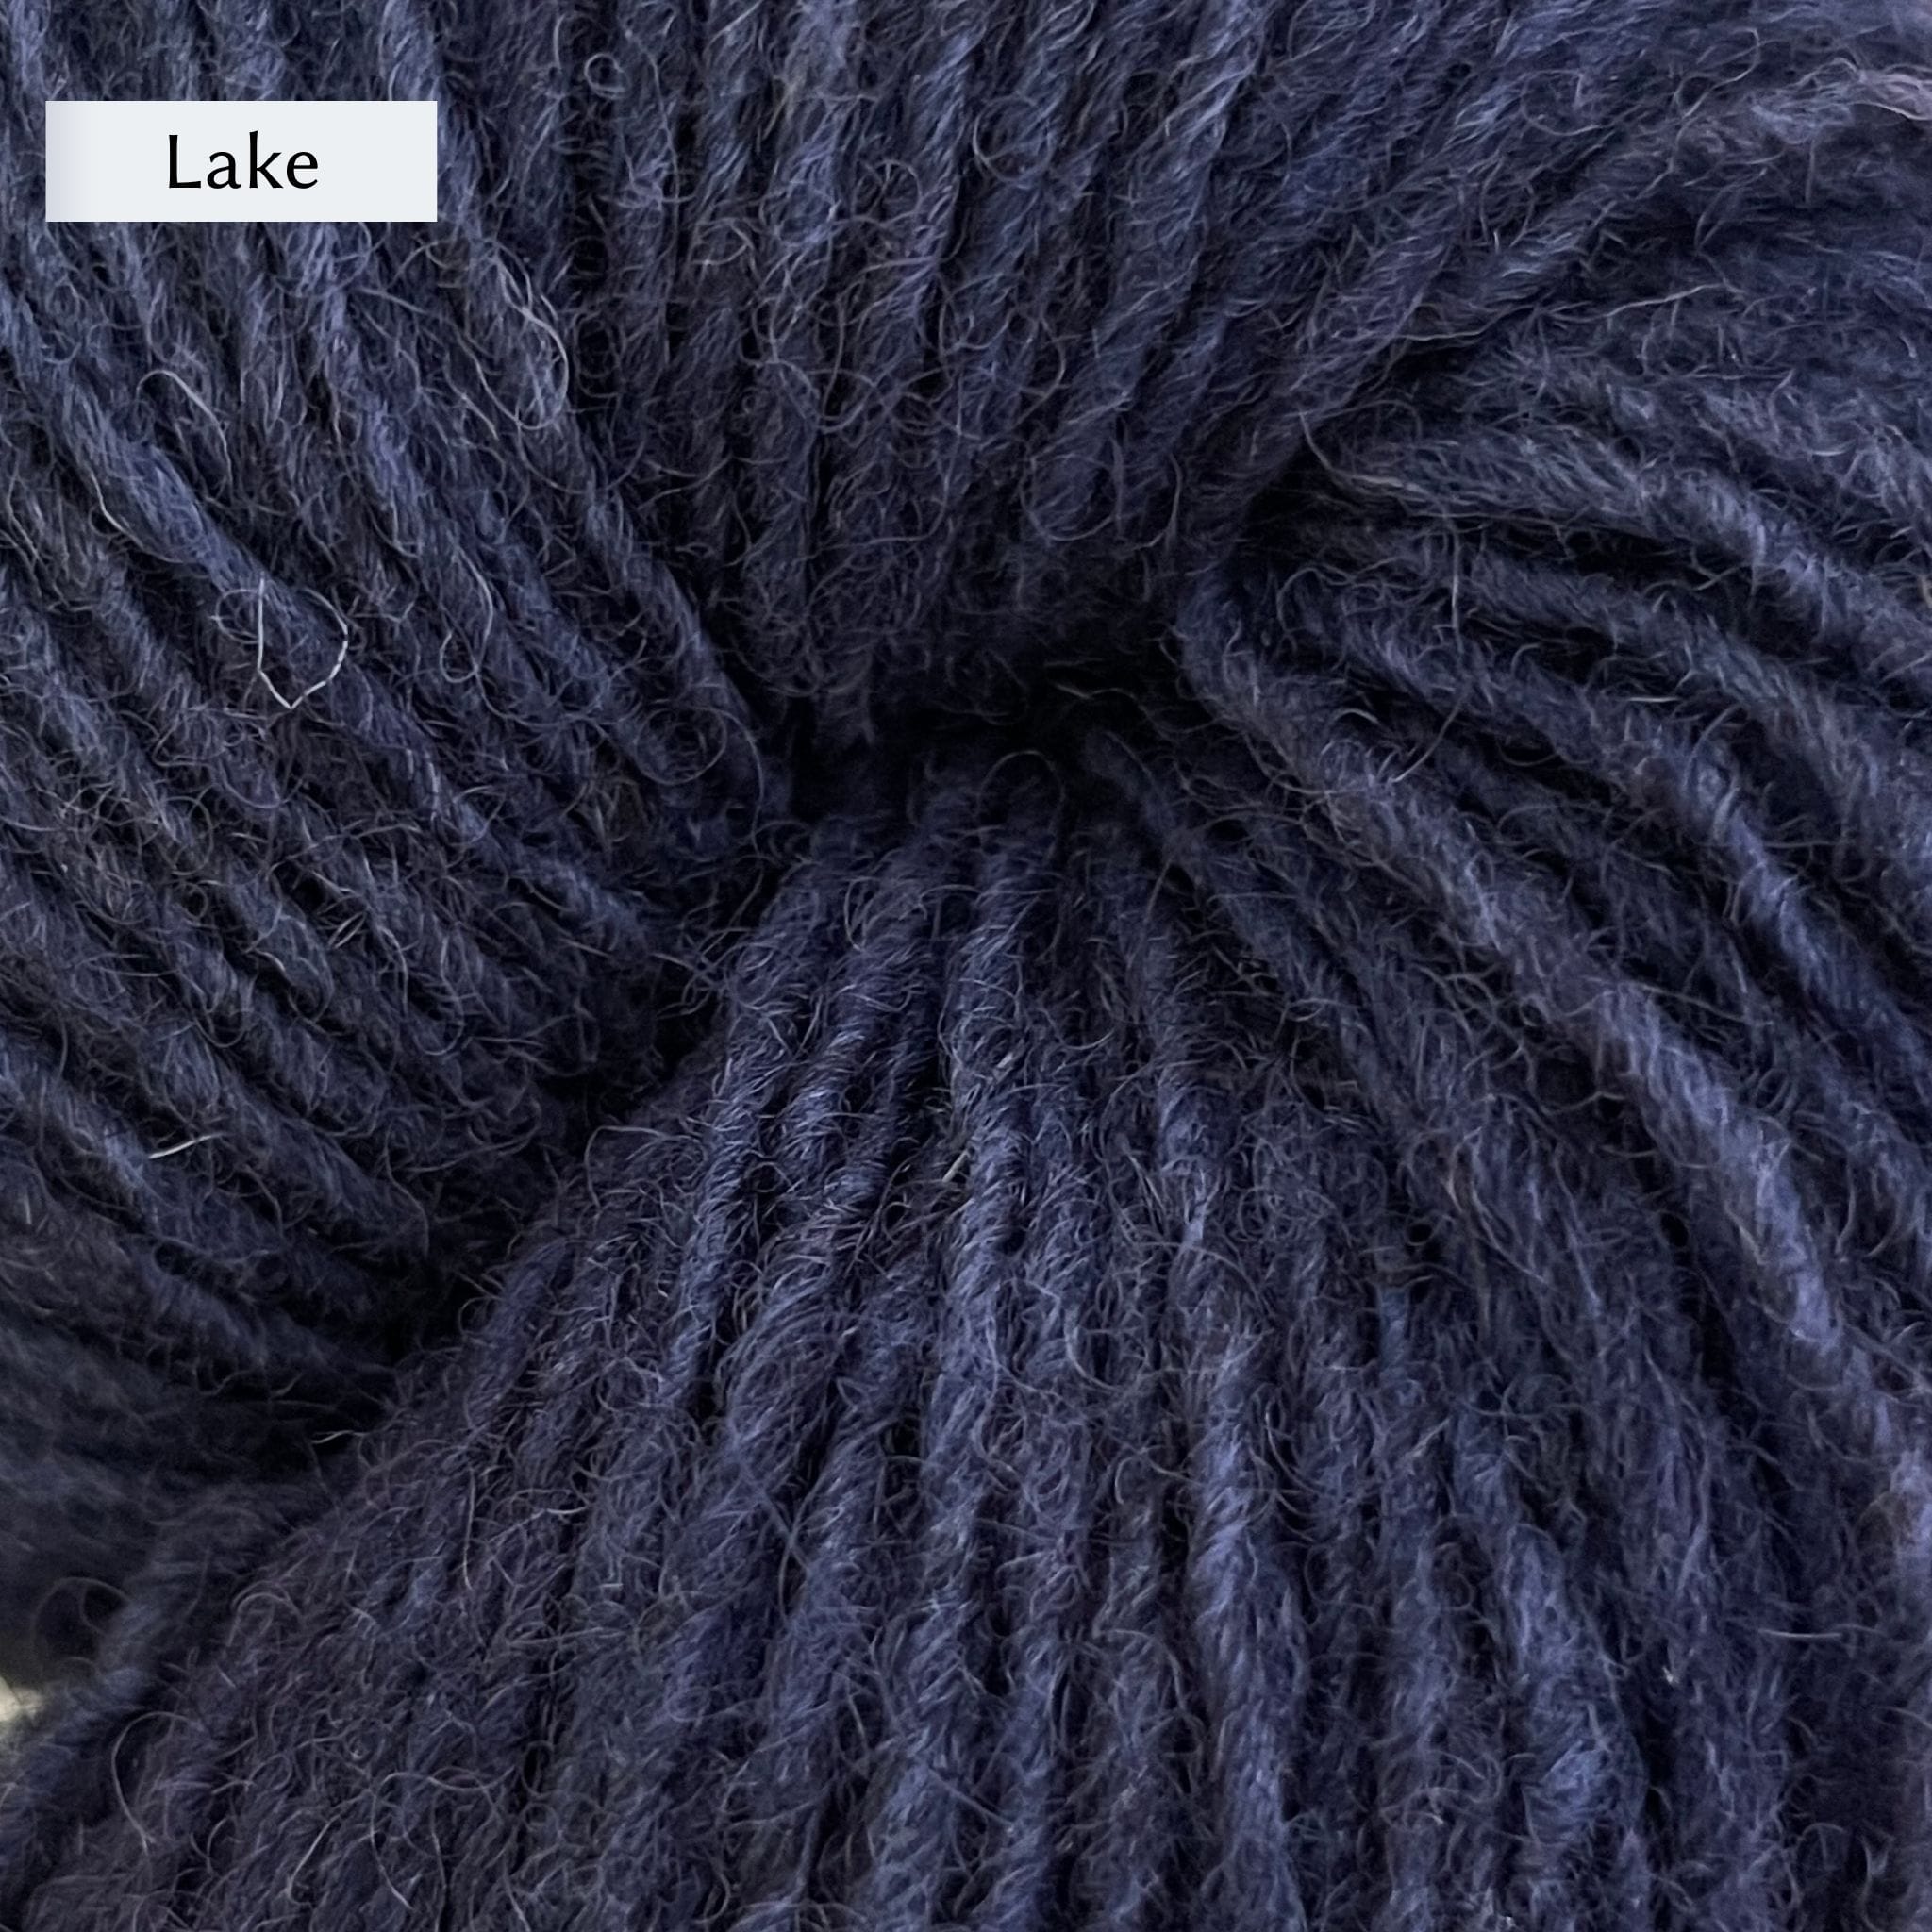 Lichen & Lace Rustic Heather Sport, a sport weight single-ply yarn, in color Lake, a deep blue